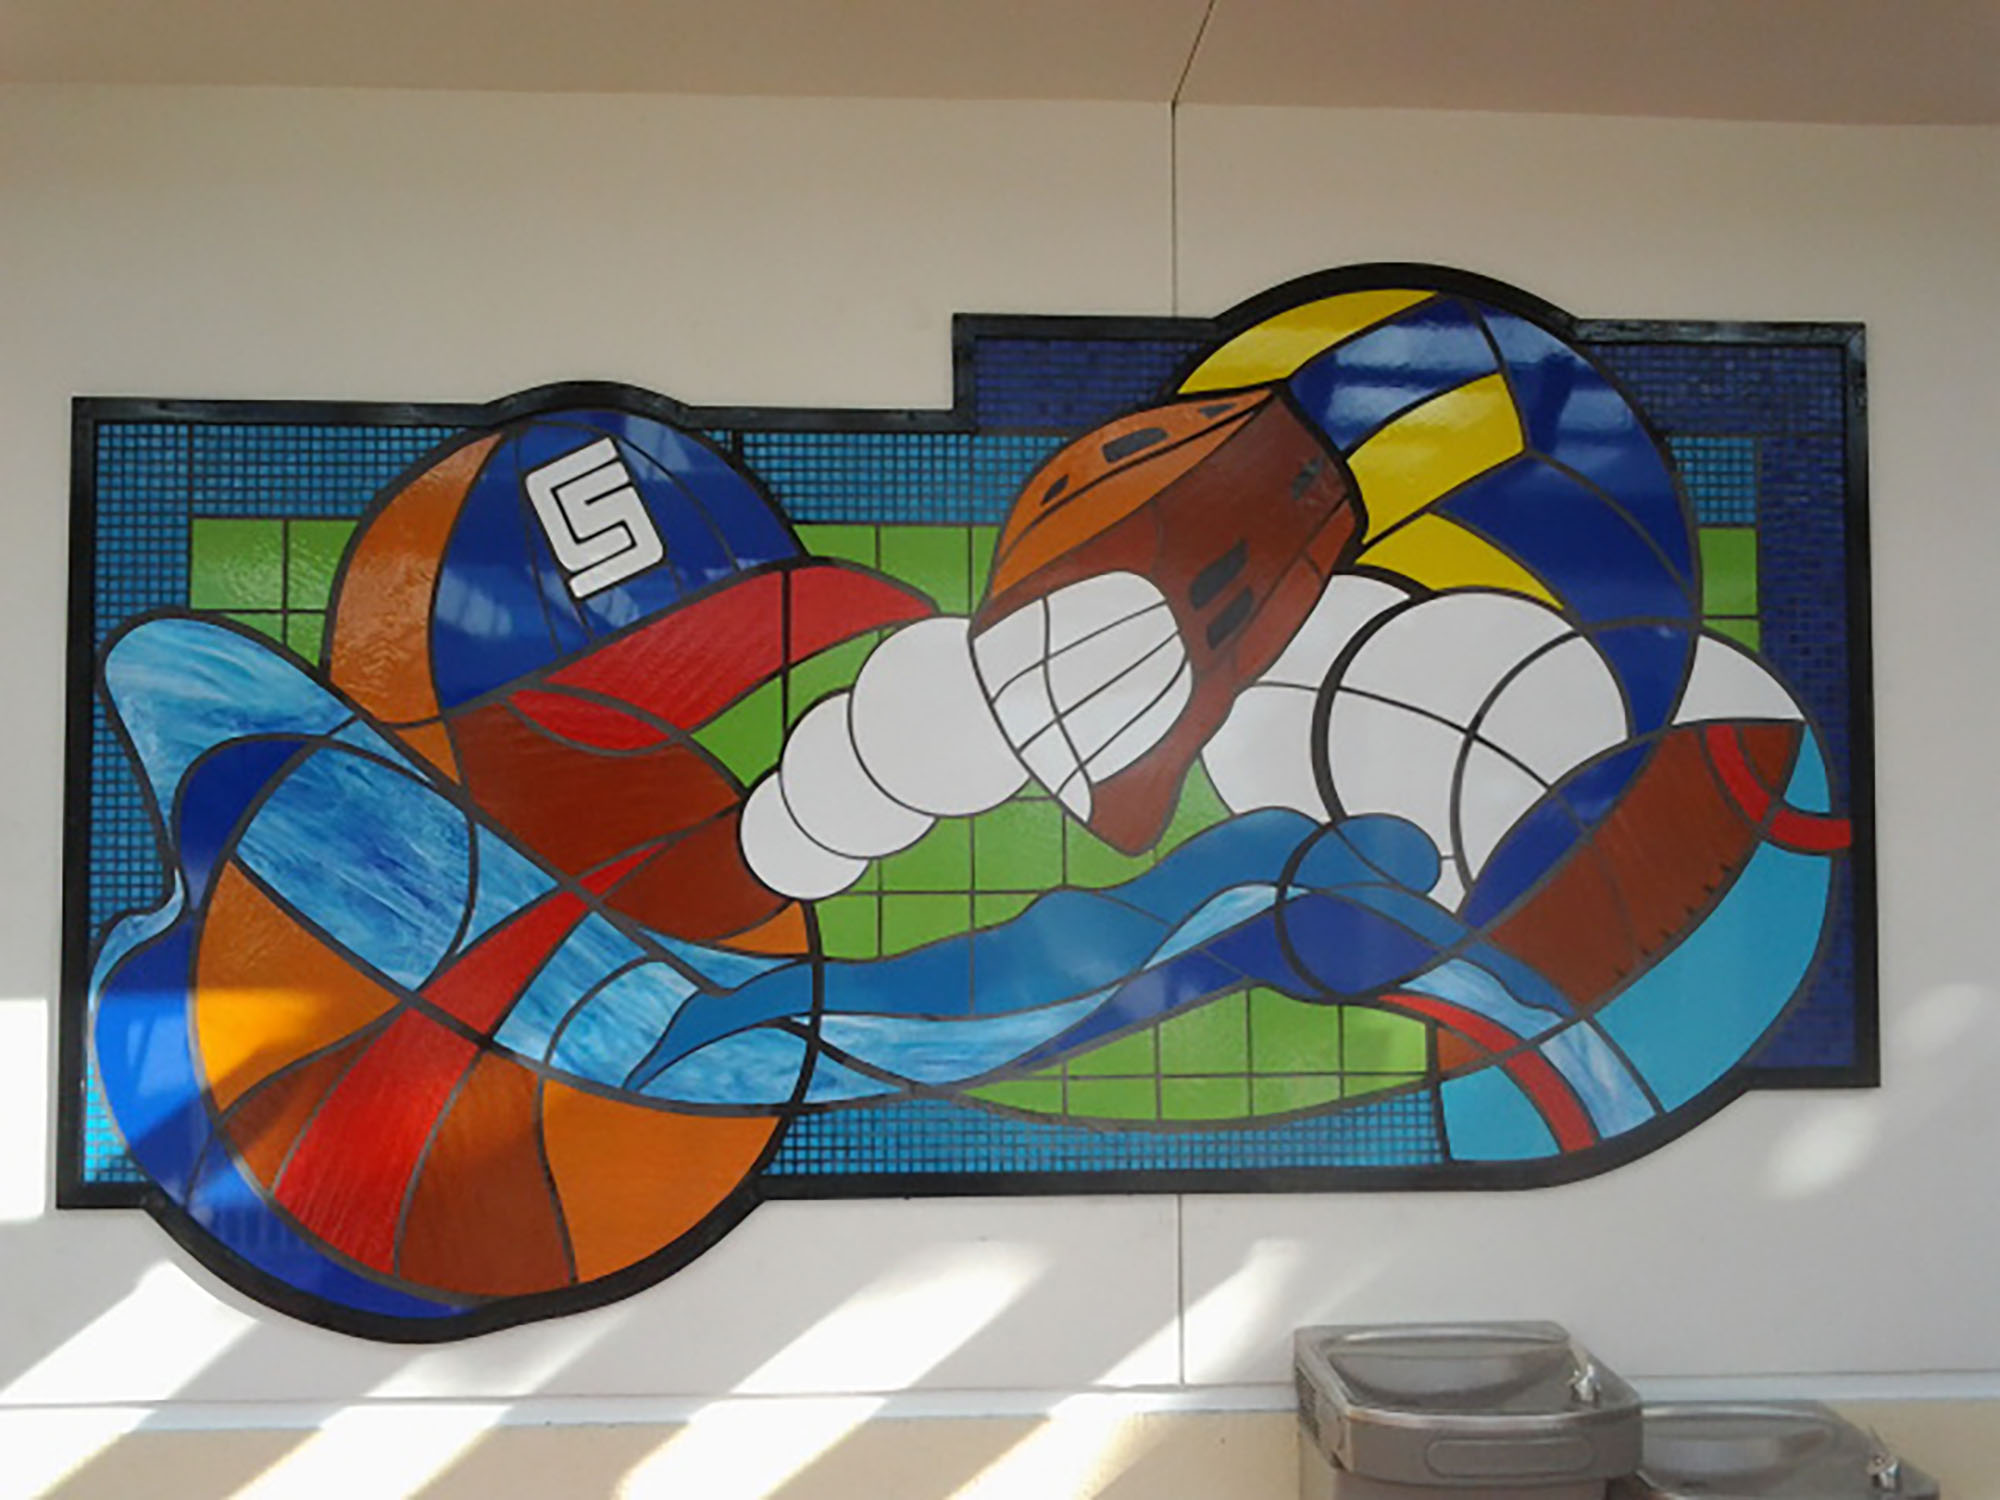 Contemporary style stained glass window of different sport balls in various colorful pieces of glass.